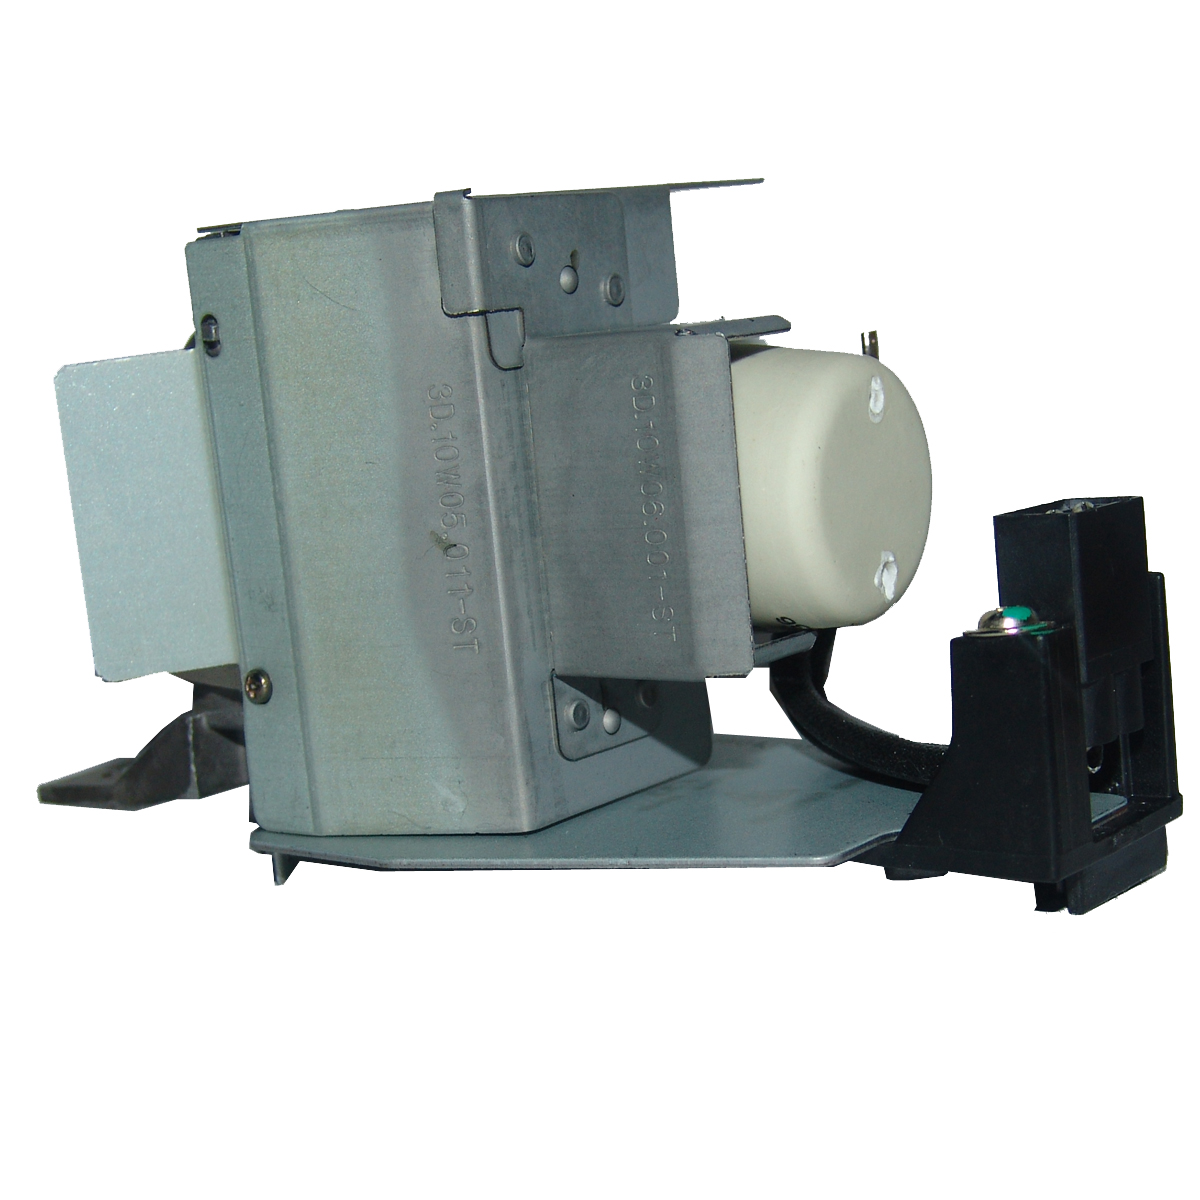 5J.J6S05.001 Lamp & Housing for BenQ Projectors - 90 Day Warranty - image 4 of 5